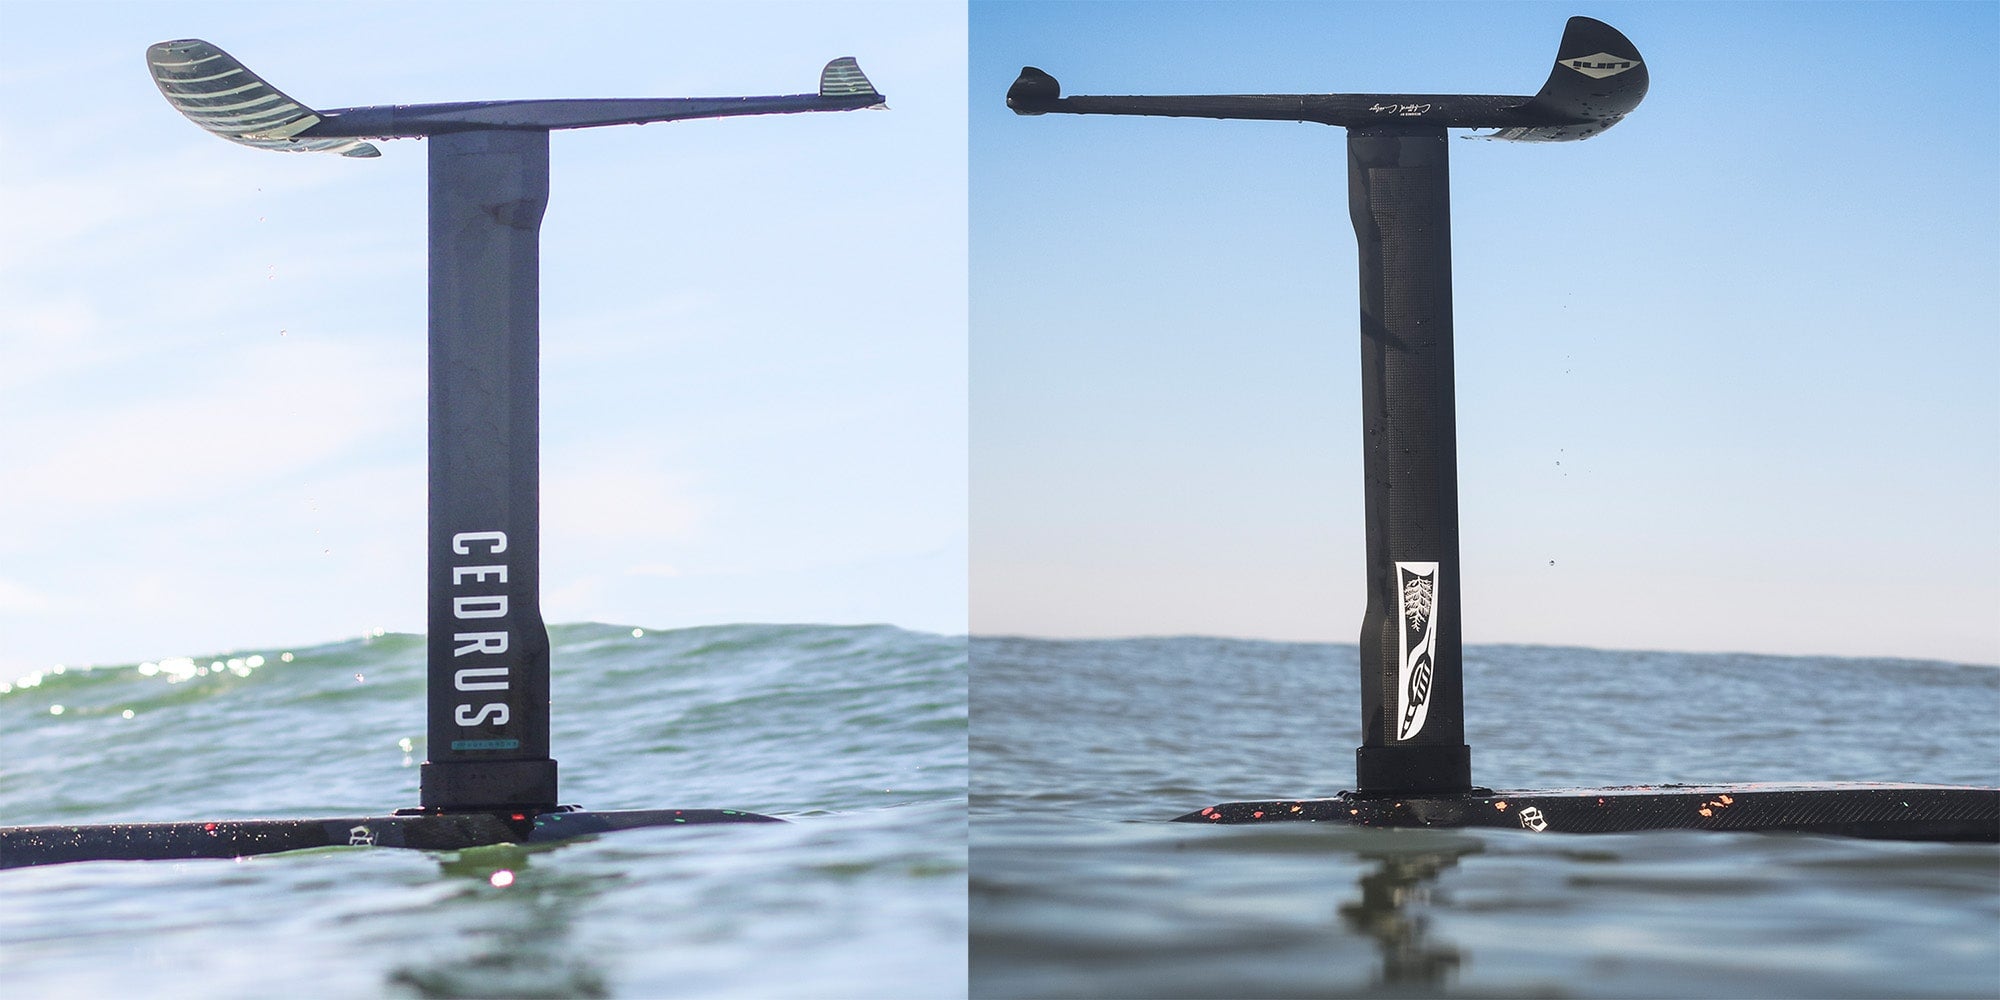 Split image of two different surfboards floating upside down on the ocean with the foils out of the water. Demonstrates two different hydrofoils working with the same Cedrus mast to show compatibility of the Cedrus mast across all major foil brands.